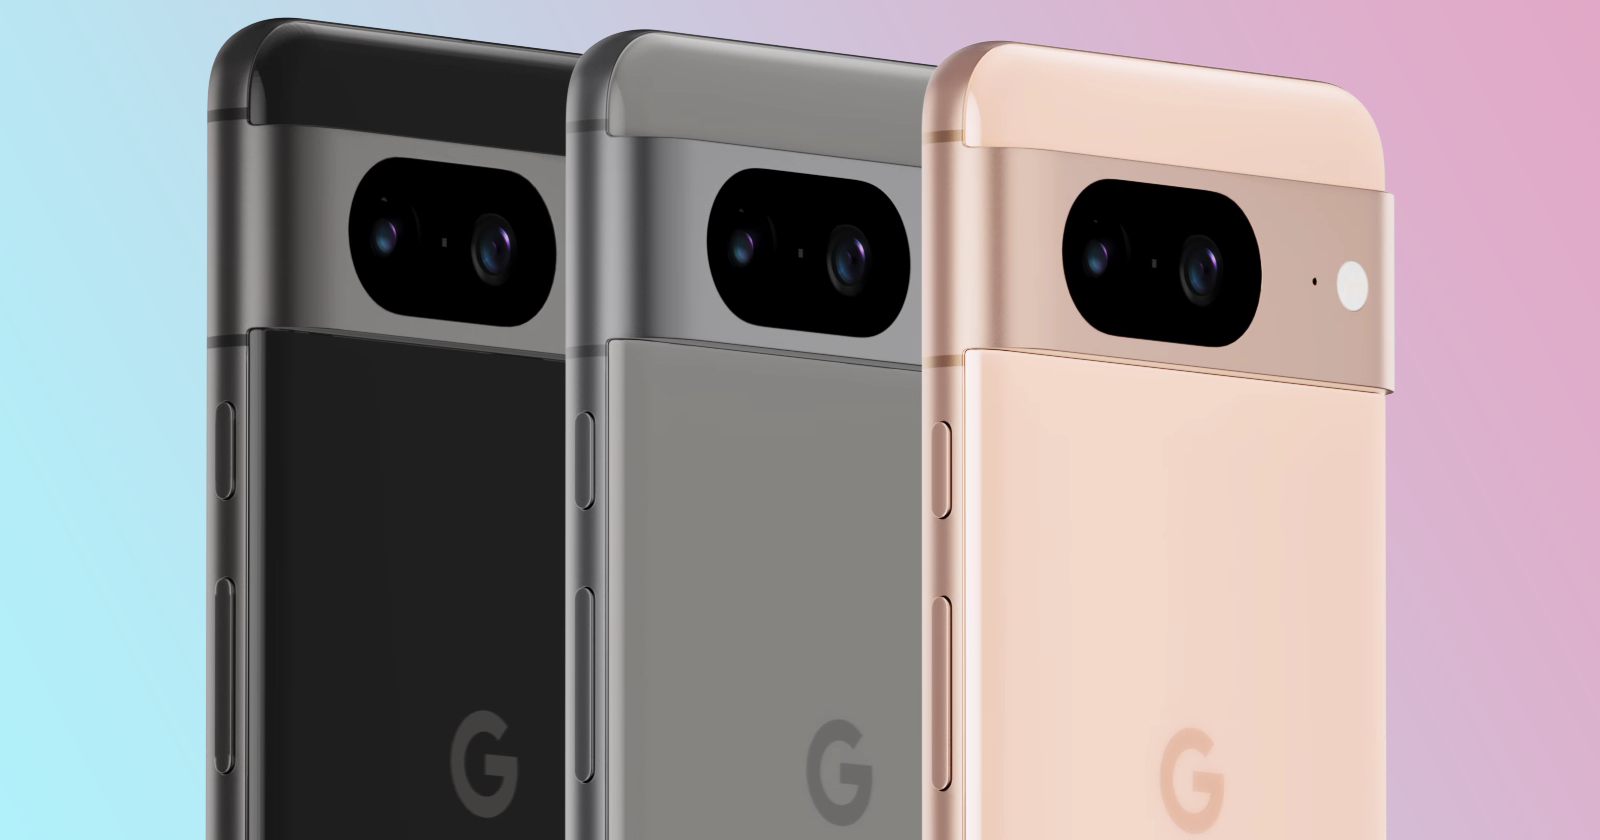 Here's Google Pixel pricing and availability details in Brazil